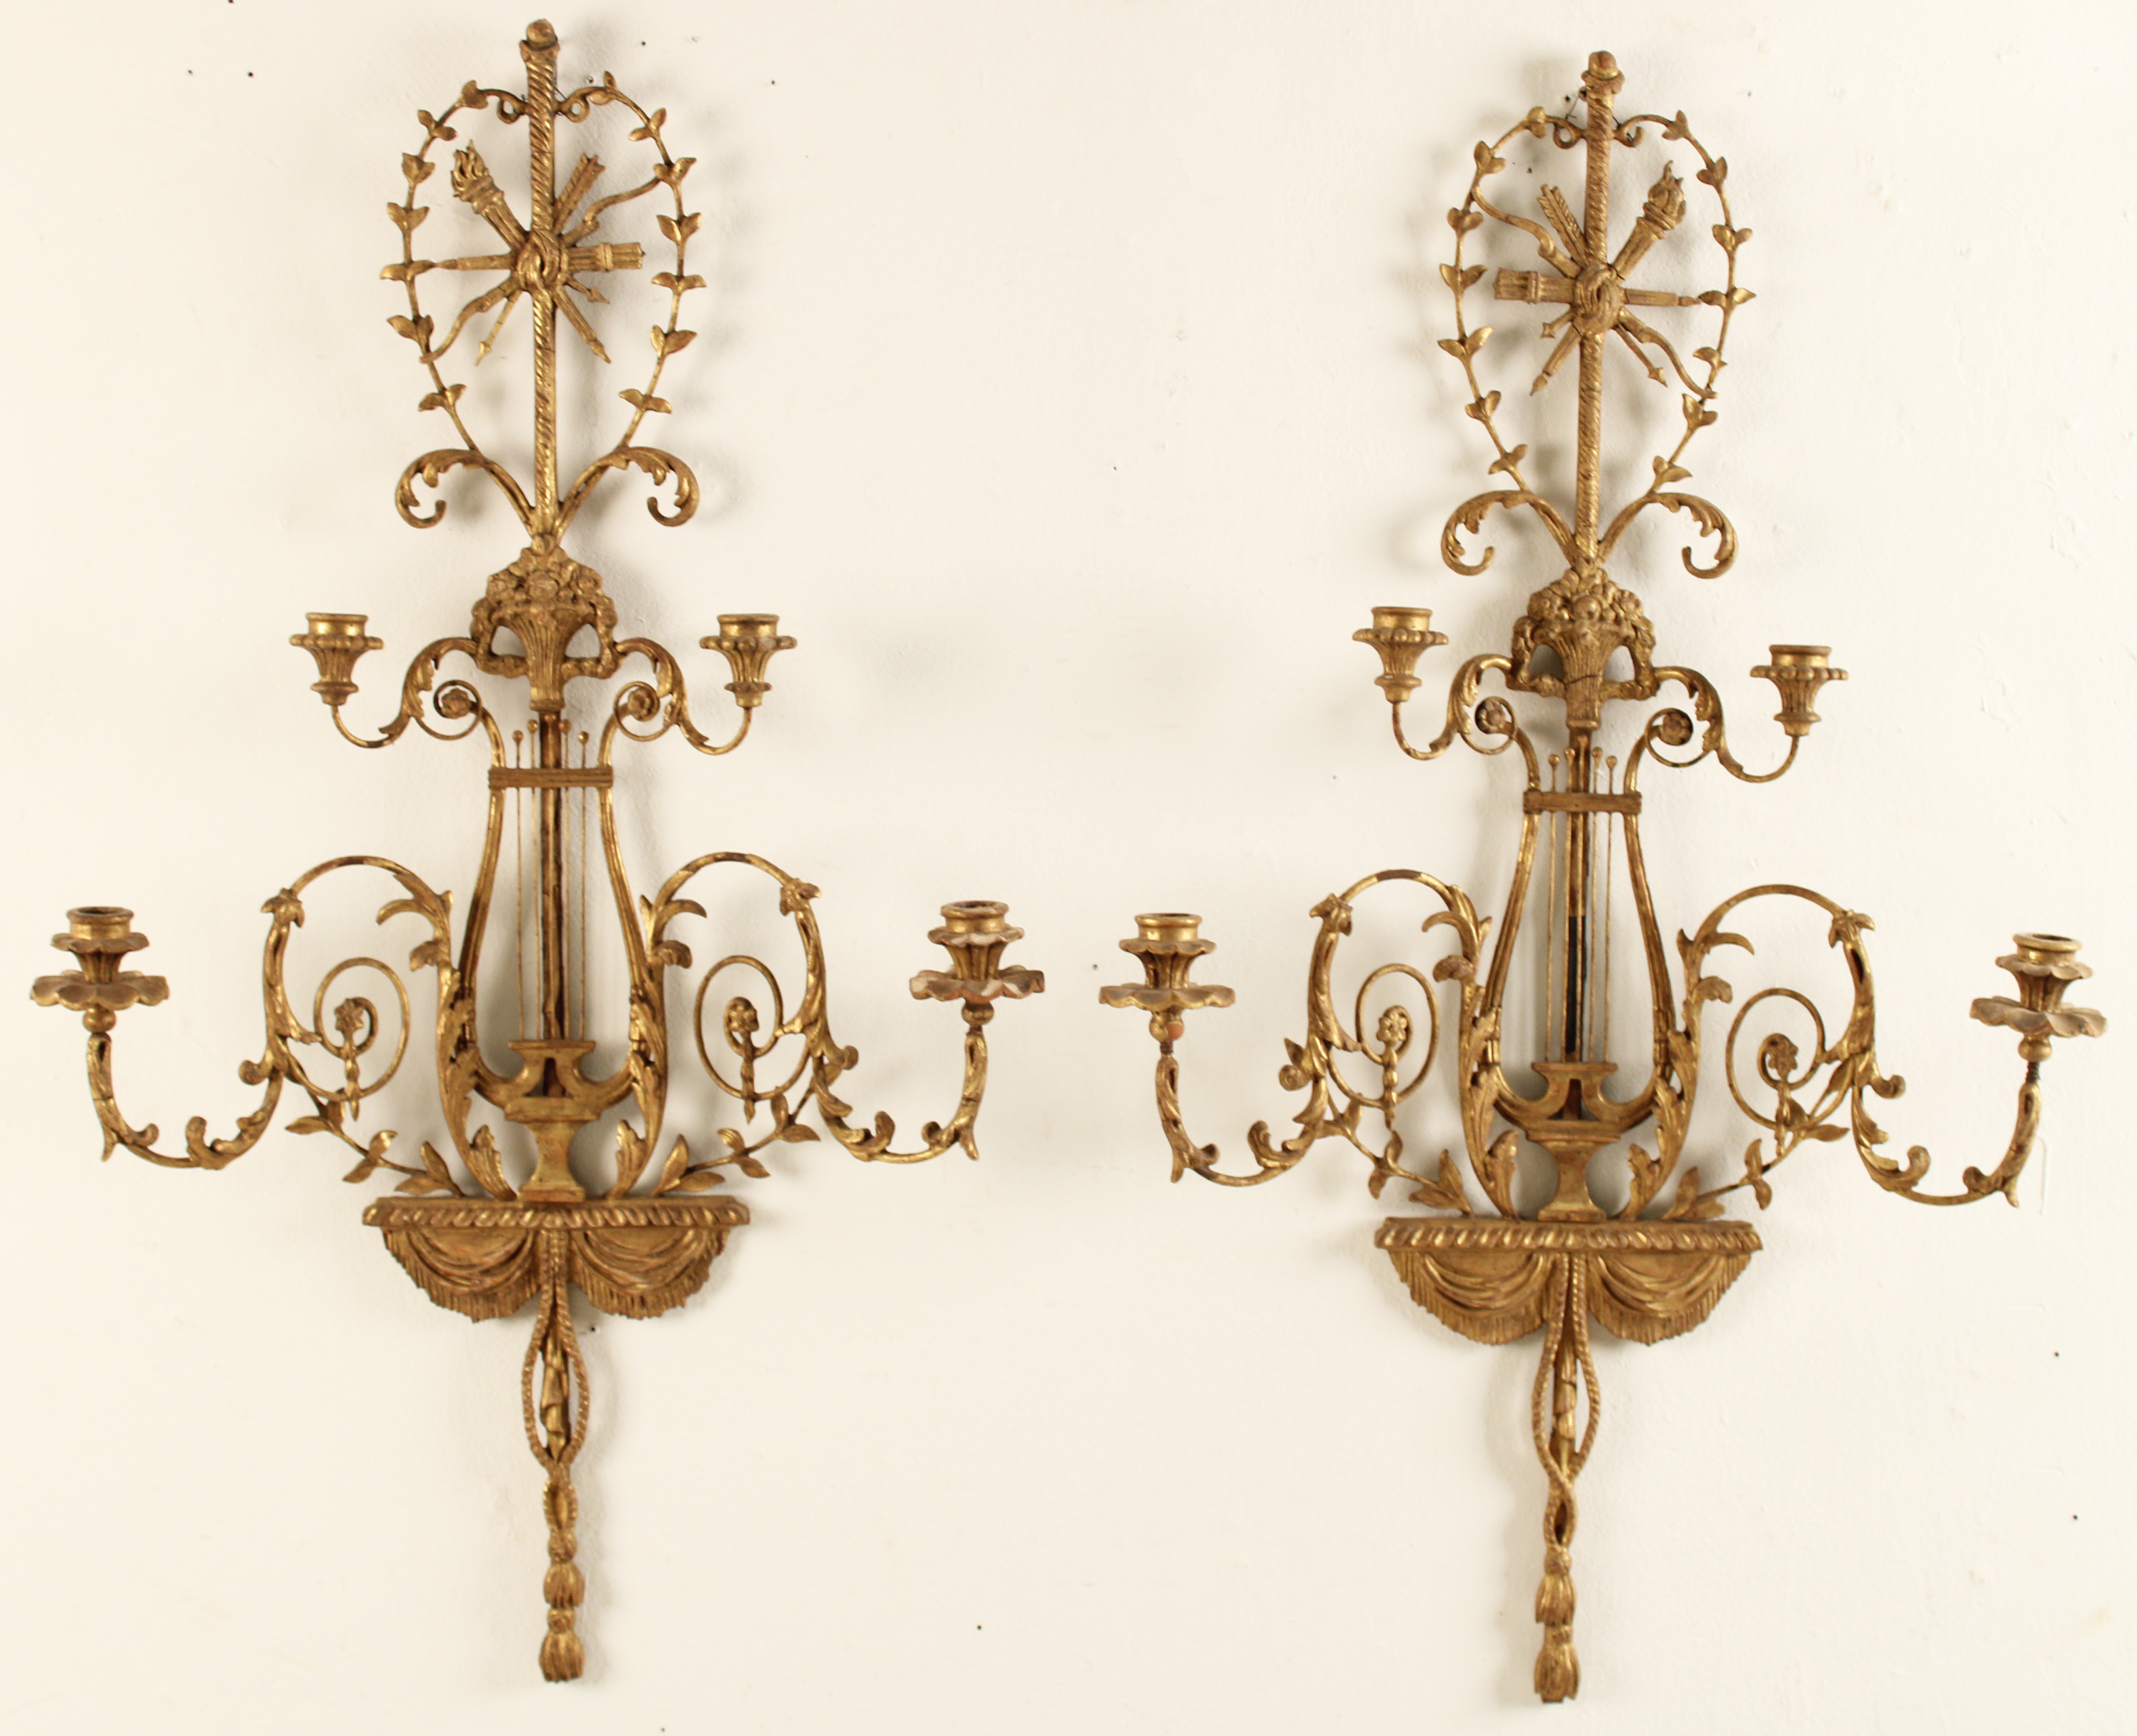 PR OF 4 LIGHT FRENCH WALL APPLIQUES 35f75e